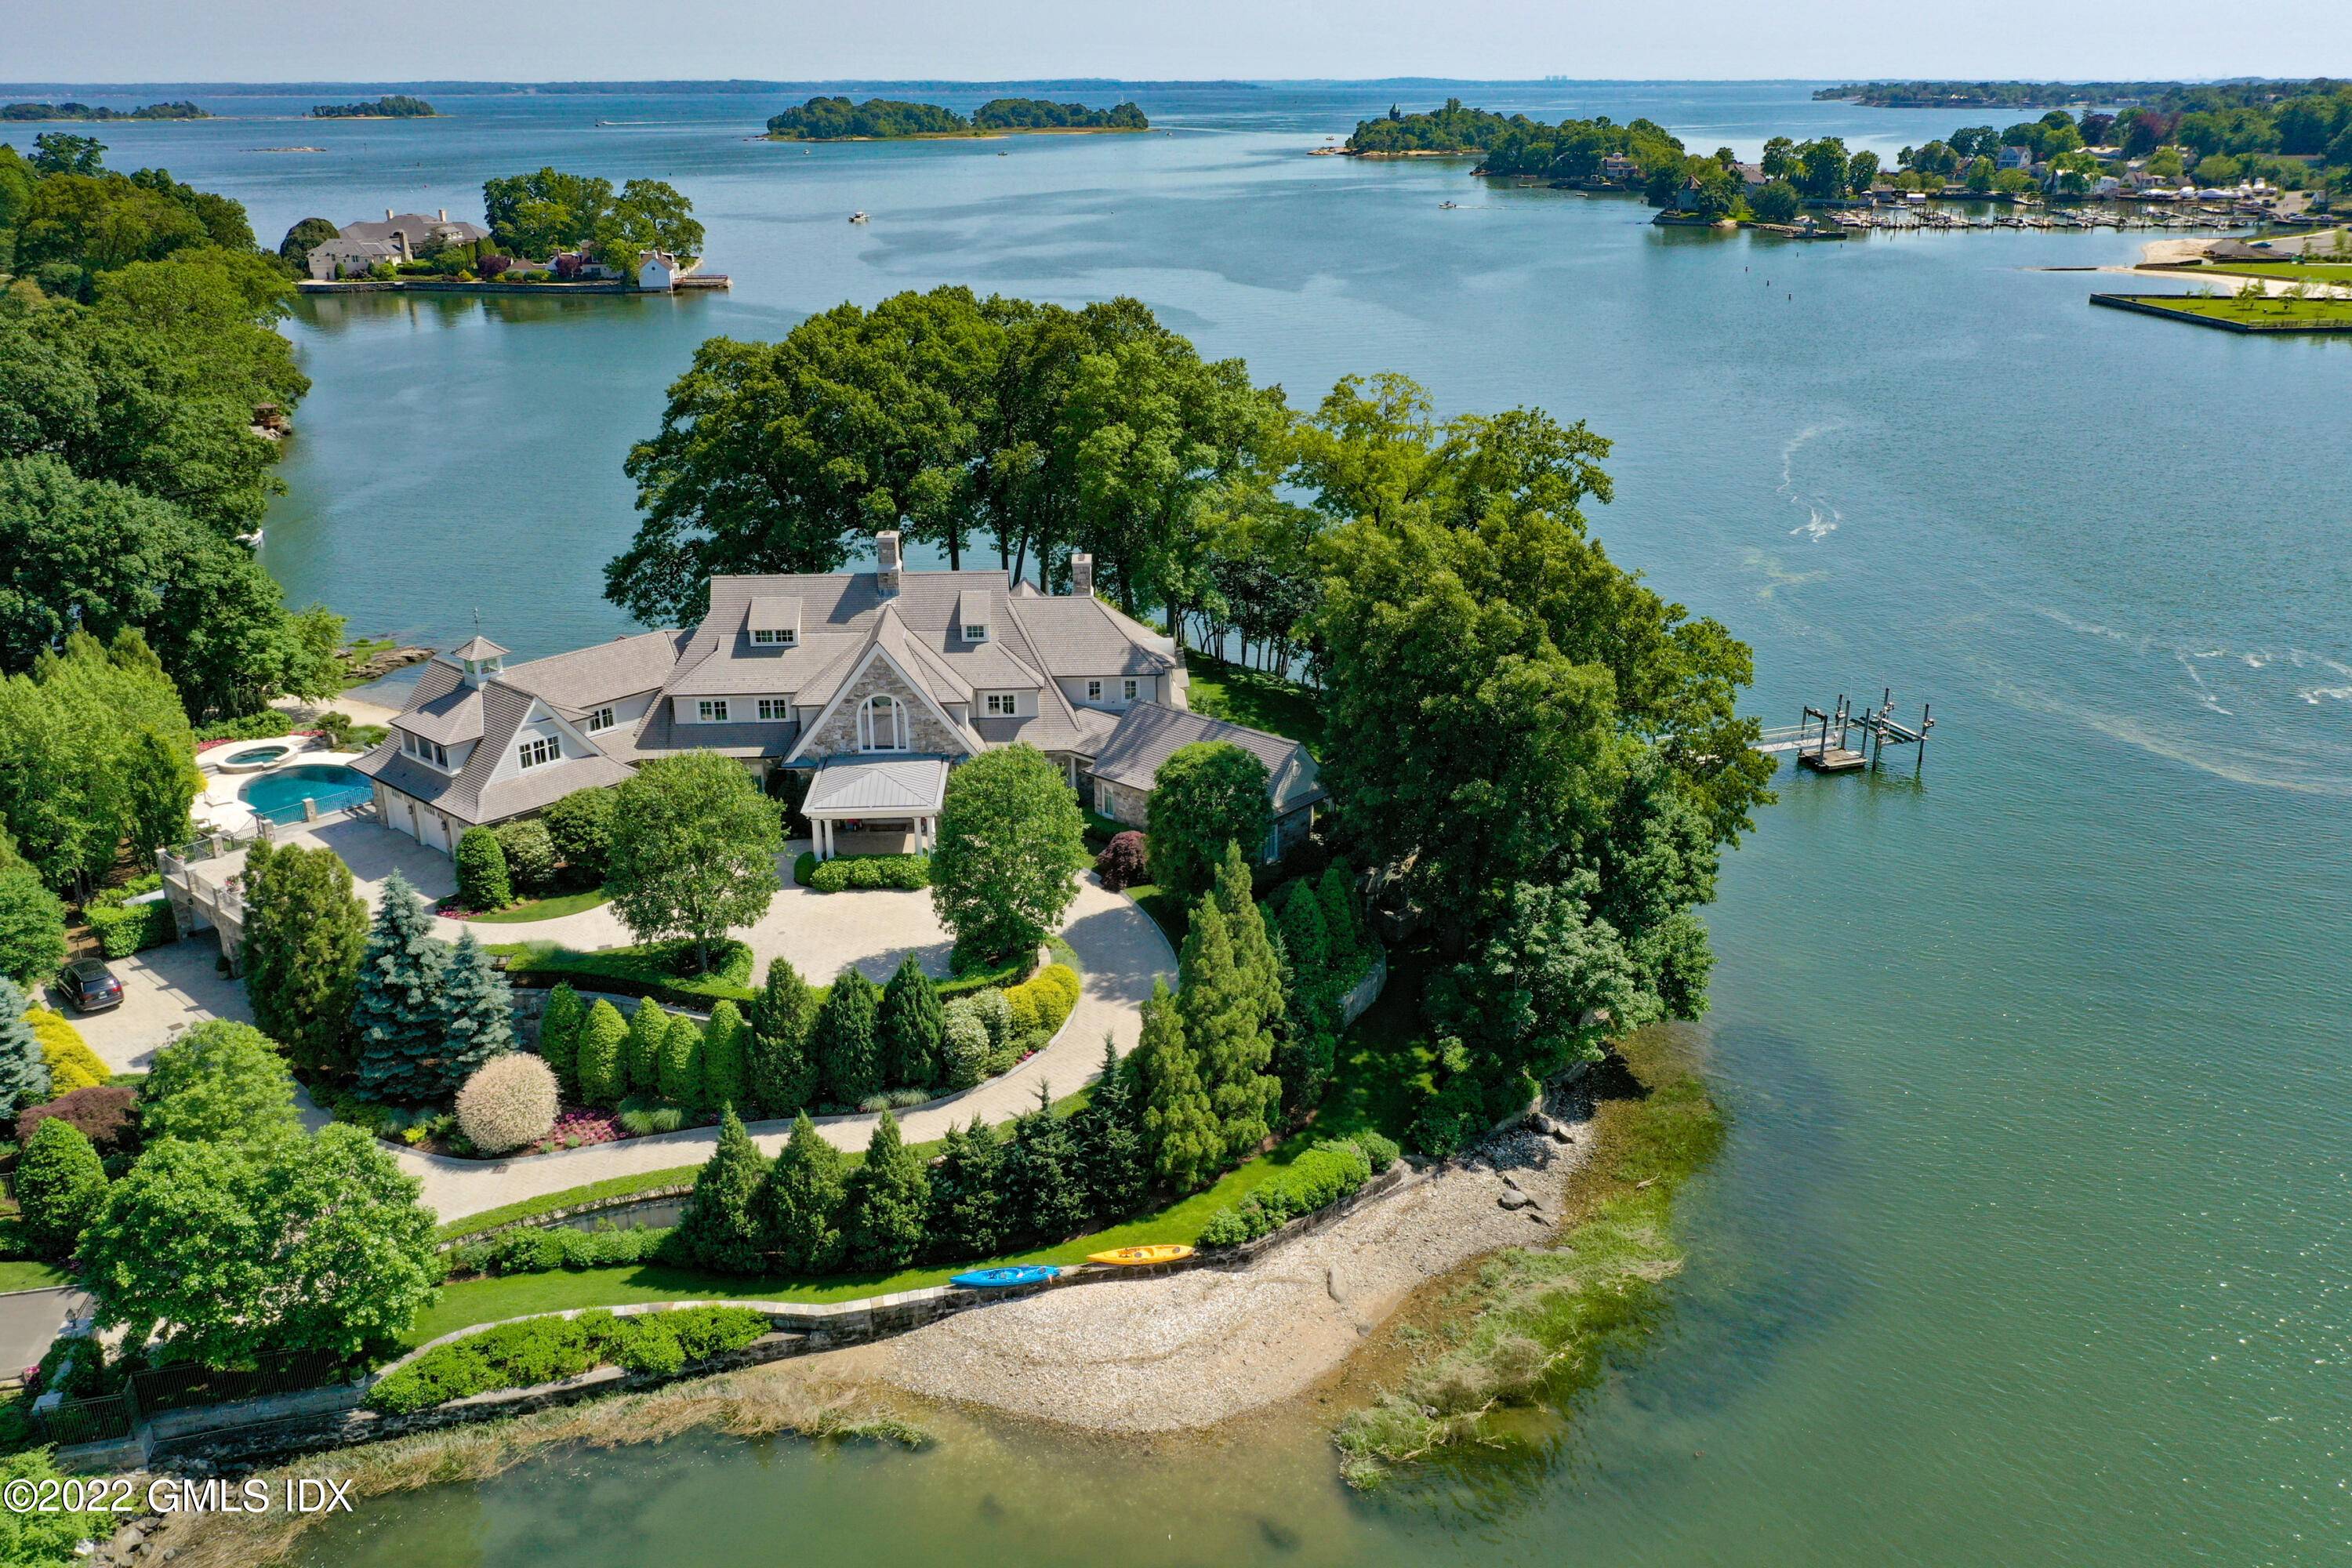 11 Island Lane is perfectly situated on a stunning peninsula w an impressive 280 degree water view 732' of private water frontage, 1.